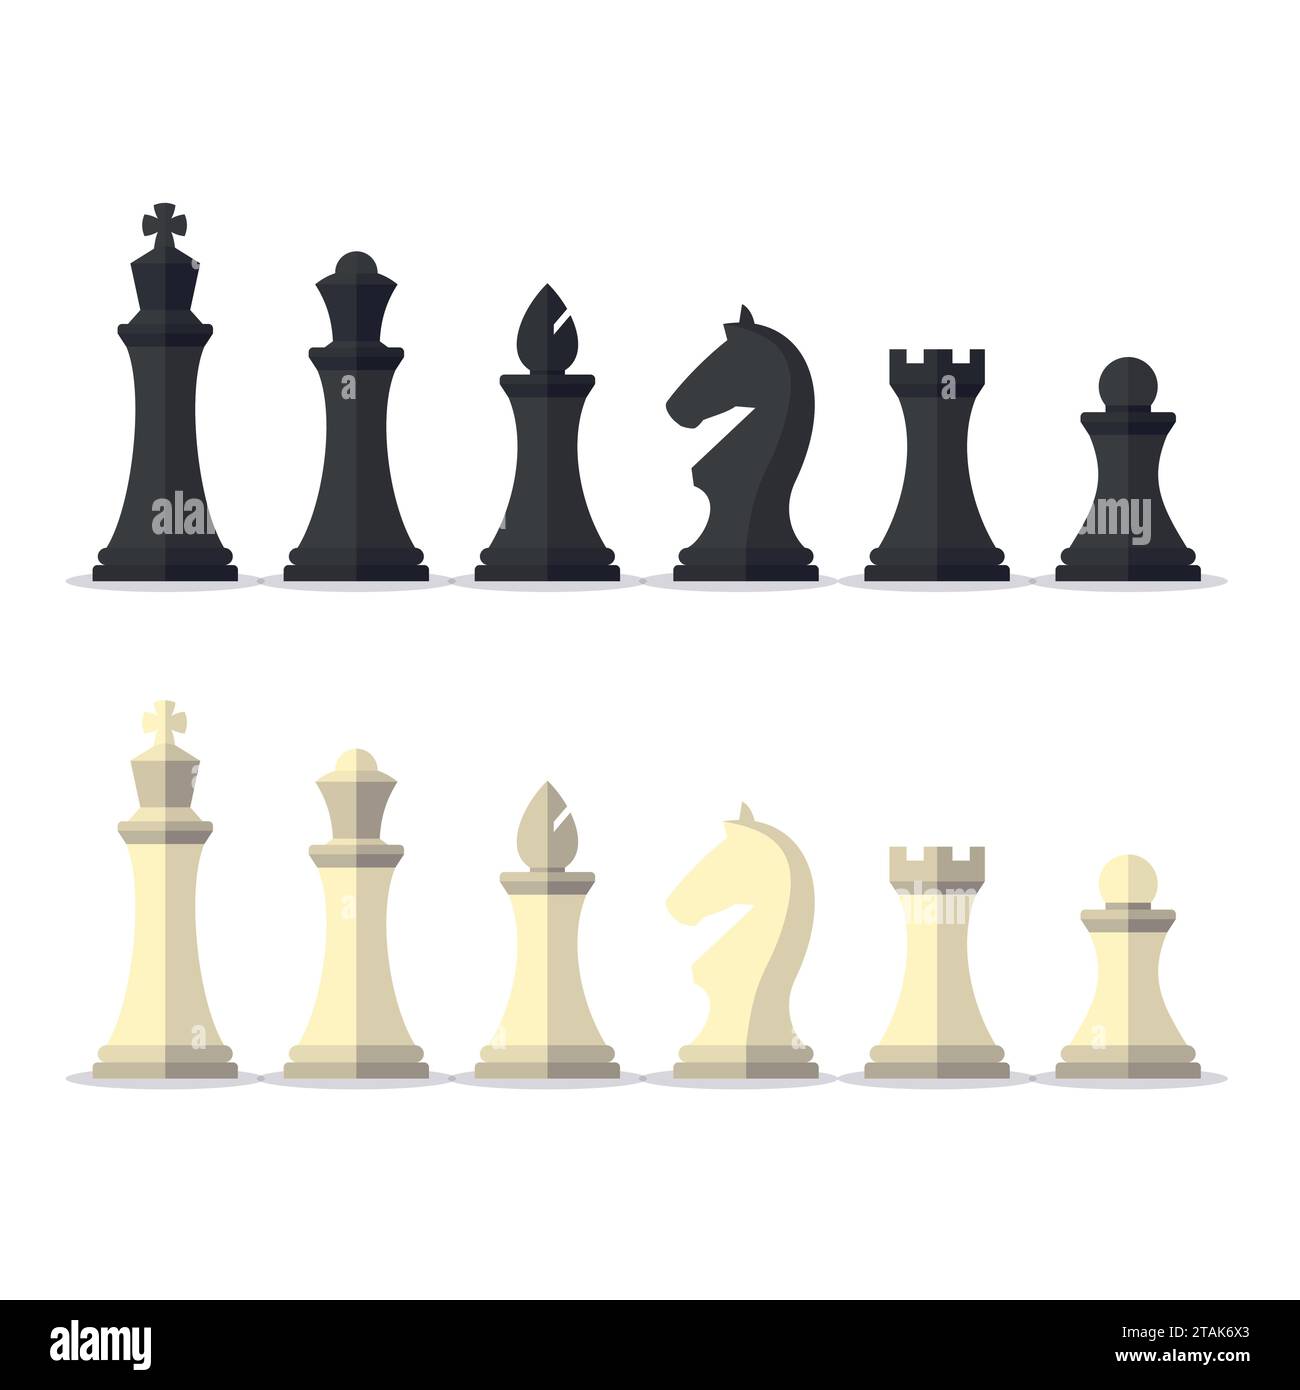 Set black and white chess pieces isolated on white background. Chess pieces including the king, queen, bishop, knight, rook and pawn in flat style. Stock Vector